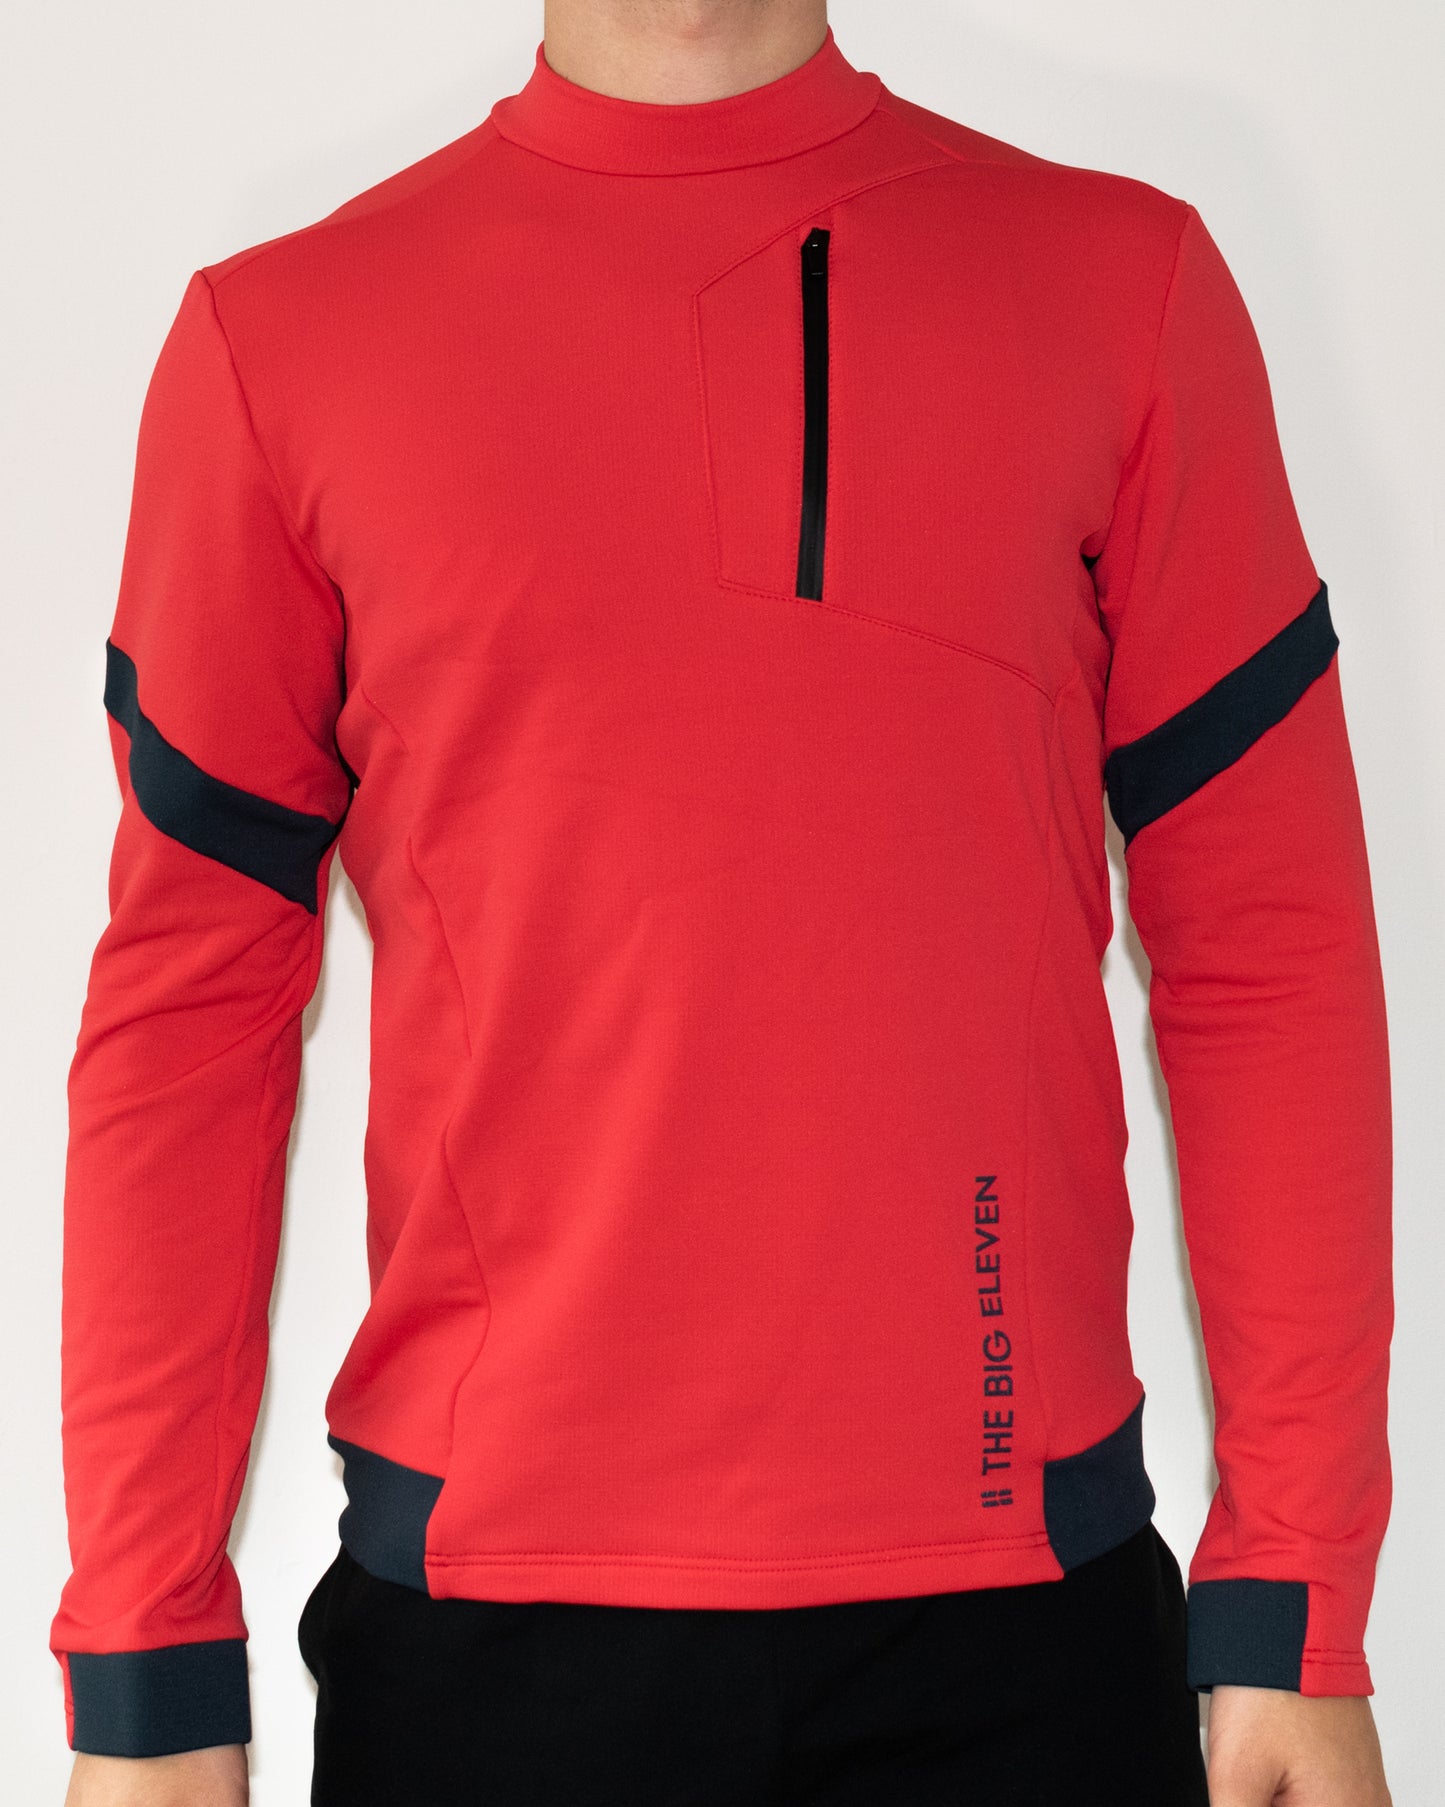 NOOK Red Plain activewear sweater